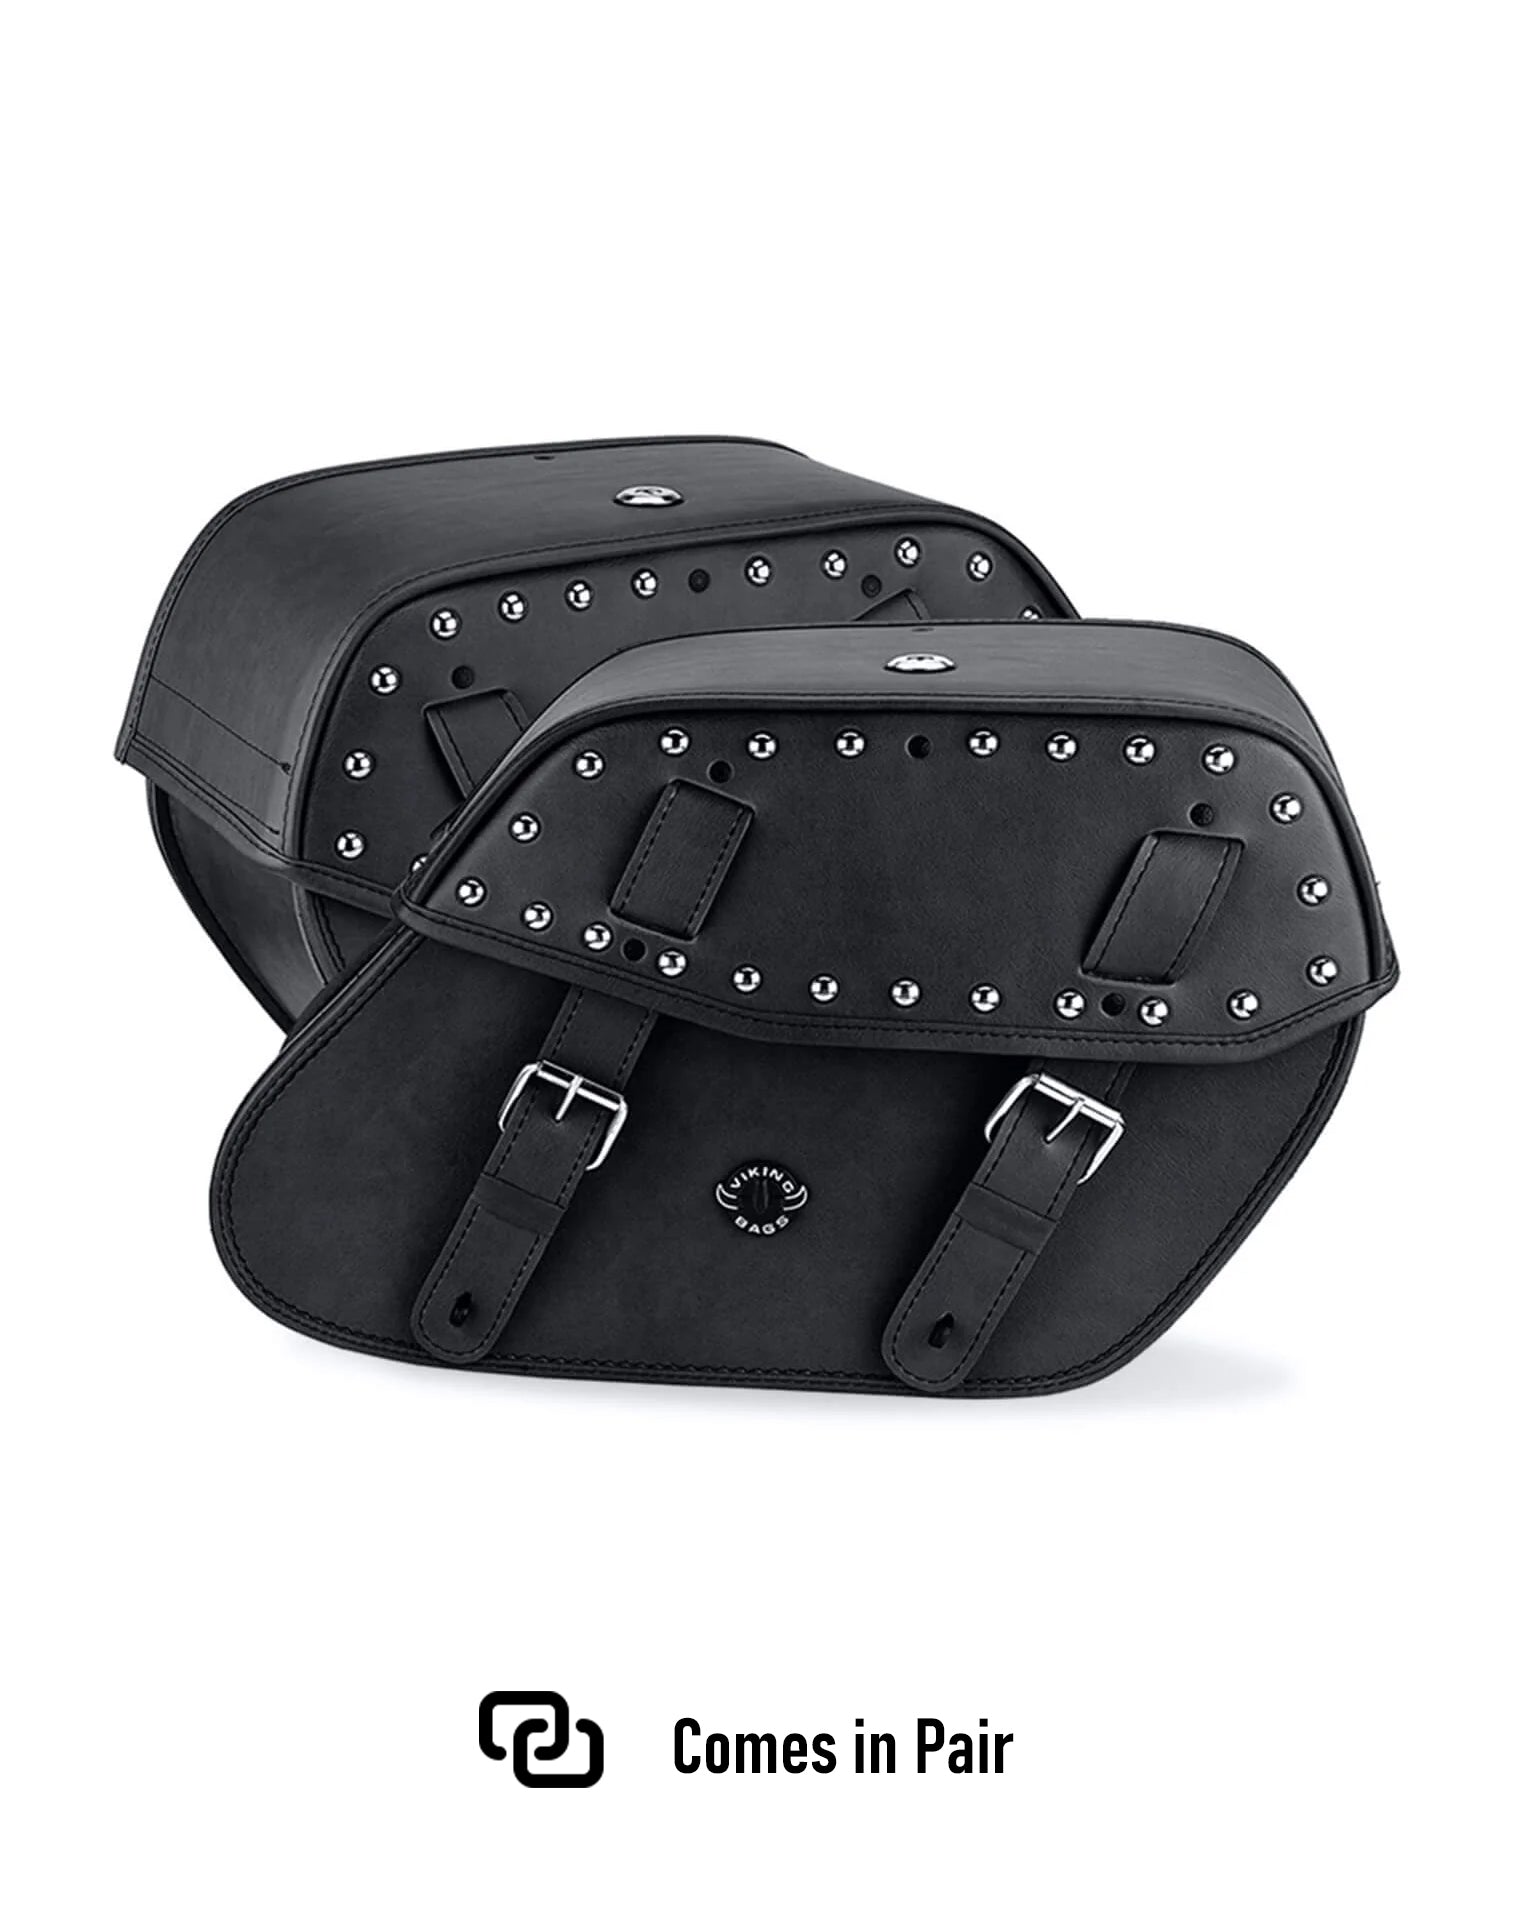 Viking Odin Large Suzuki Boulevard C90 Vl1500 Leather Studded Motorcycle Saddlebags Weather Resistant Bags Comes in Pair